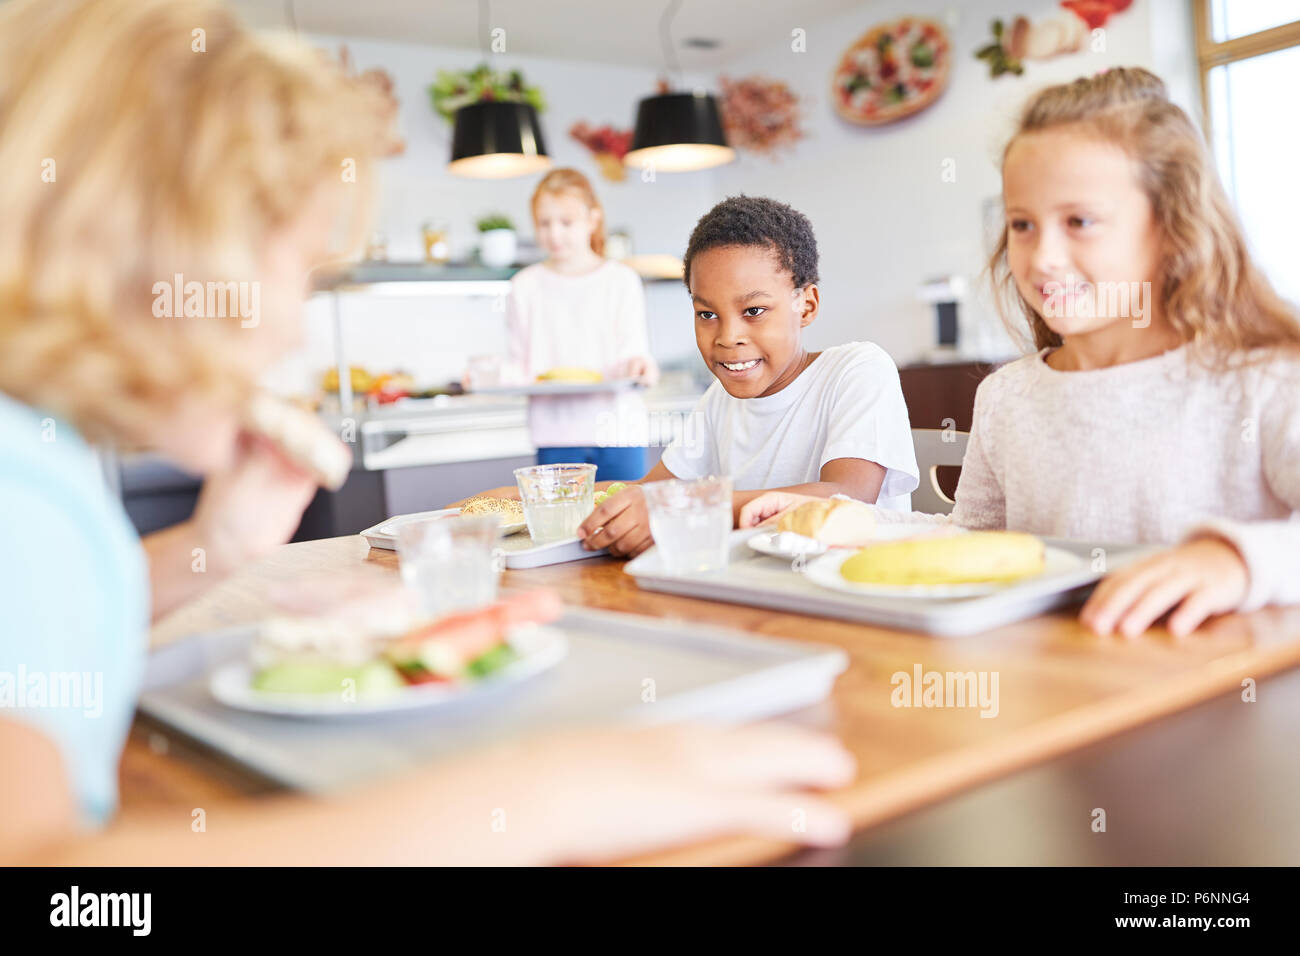 https://c8.alamy.com/comp/P6NNG4/happy-children-having-lunch-together-in-primary-school-canteen-P6NNG4.jpg